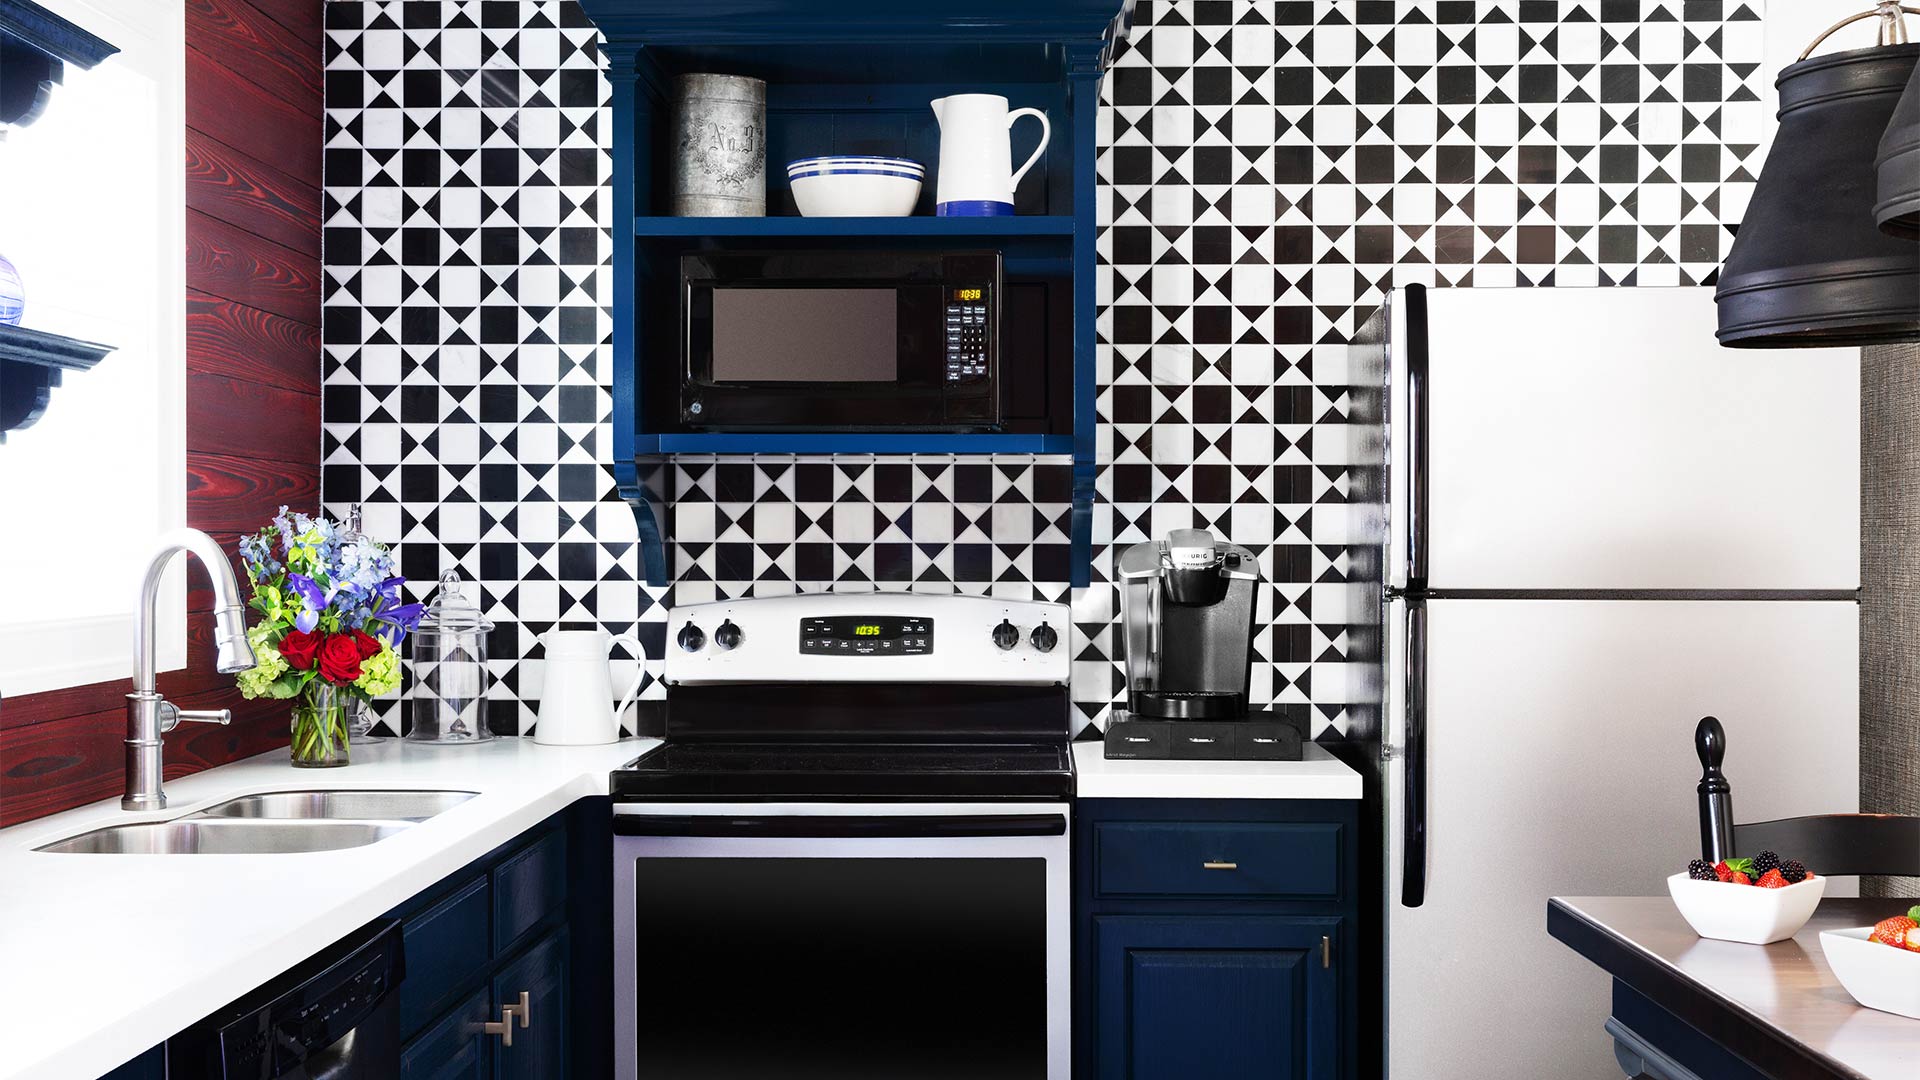 an interior shot of the full kitchen in the townhomes. The tiling is a geometric black and white print. There is a sink, a full fridge, an over and stovetop. There is ample counter and storage space.